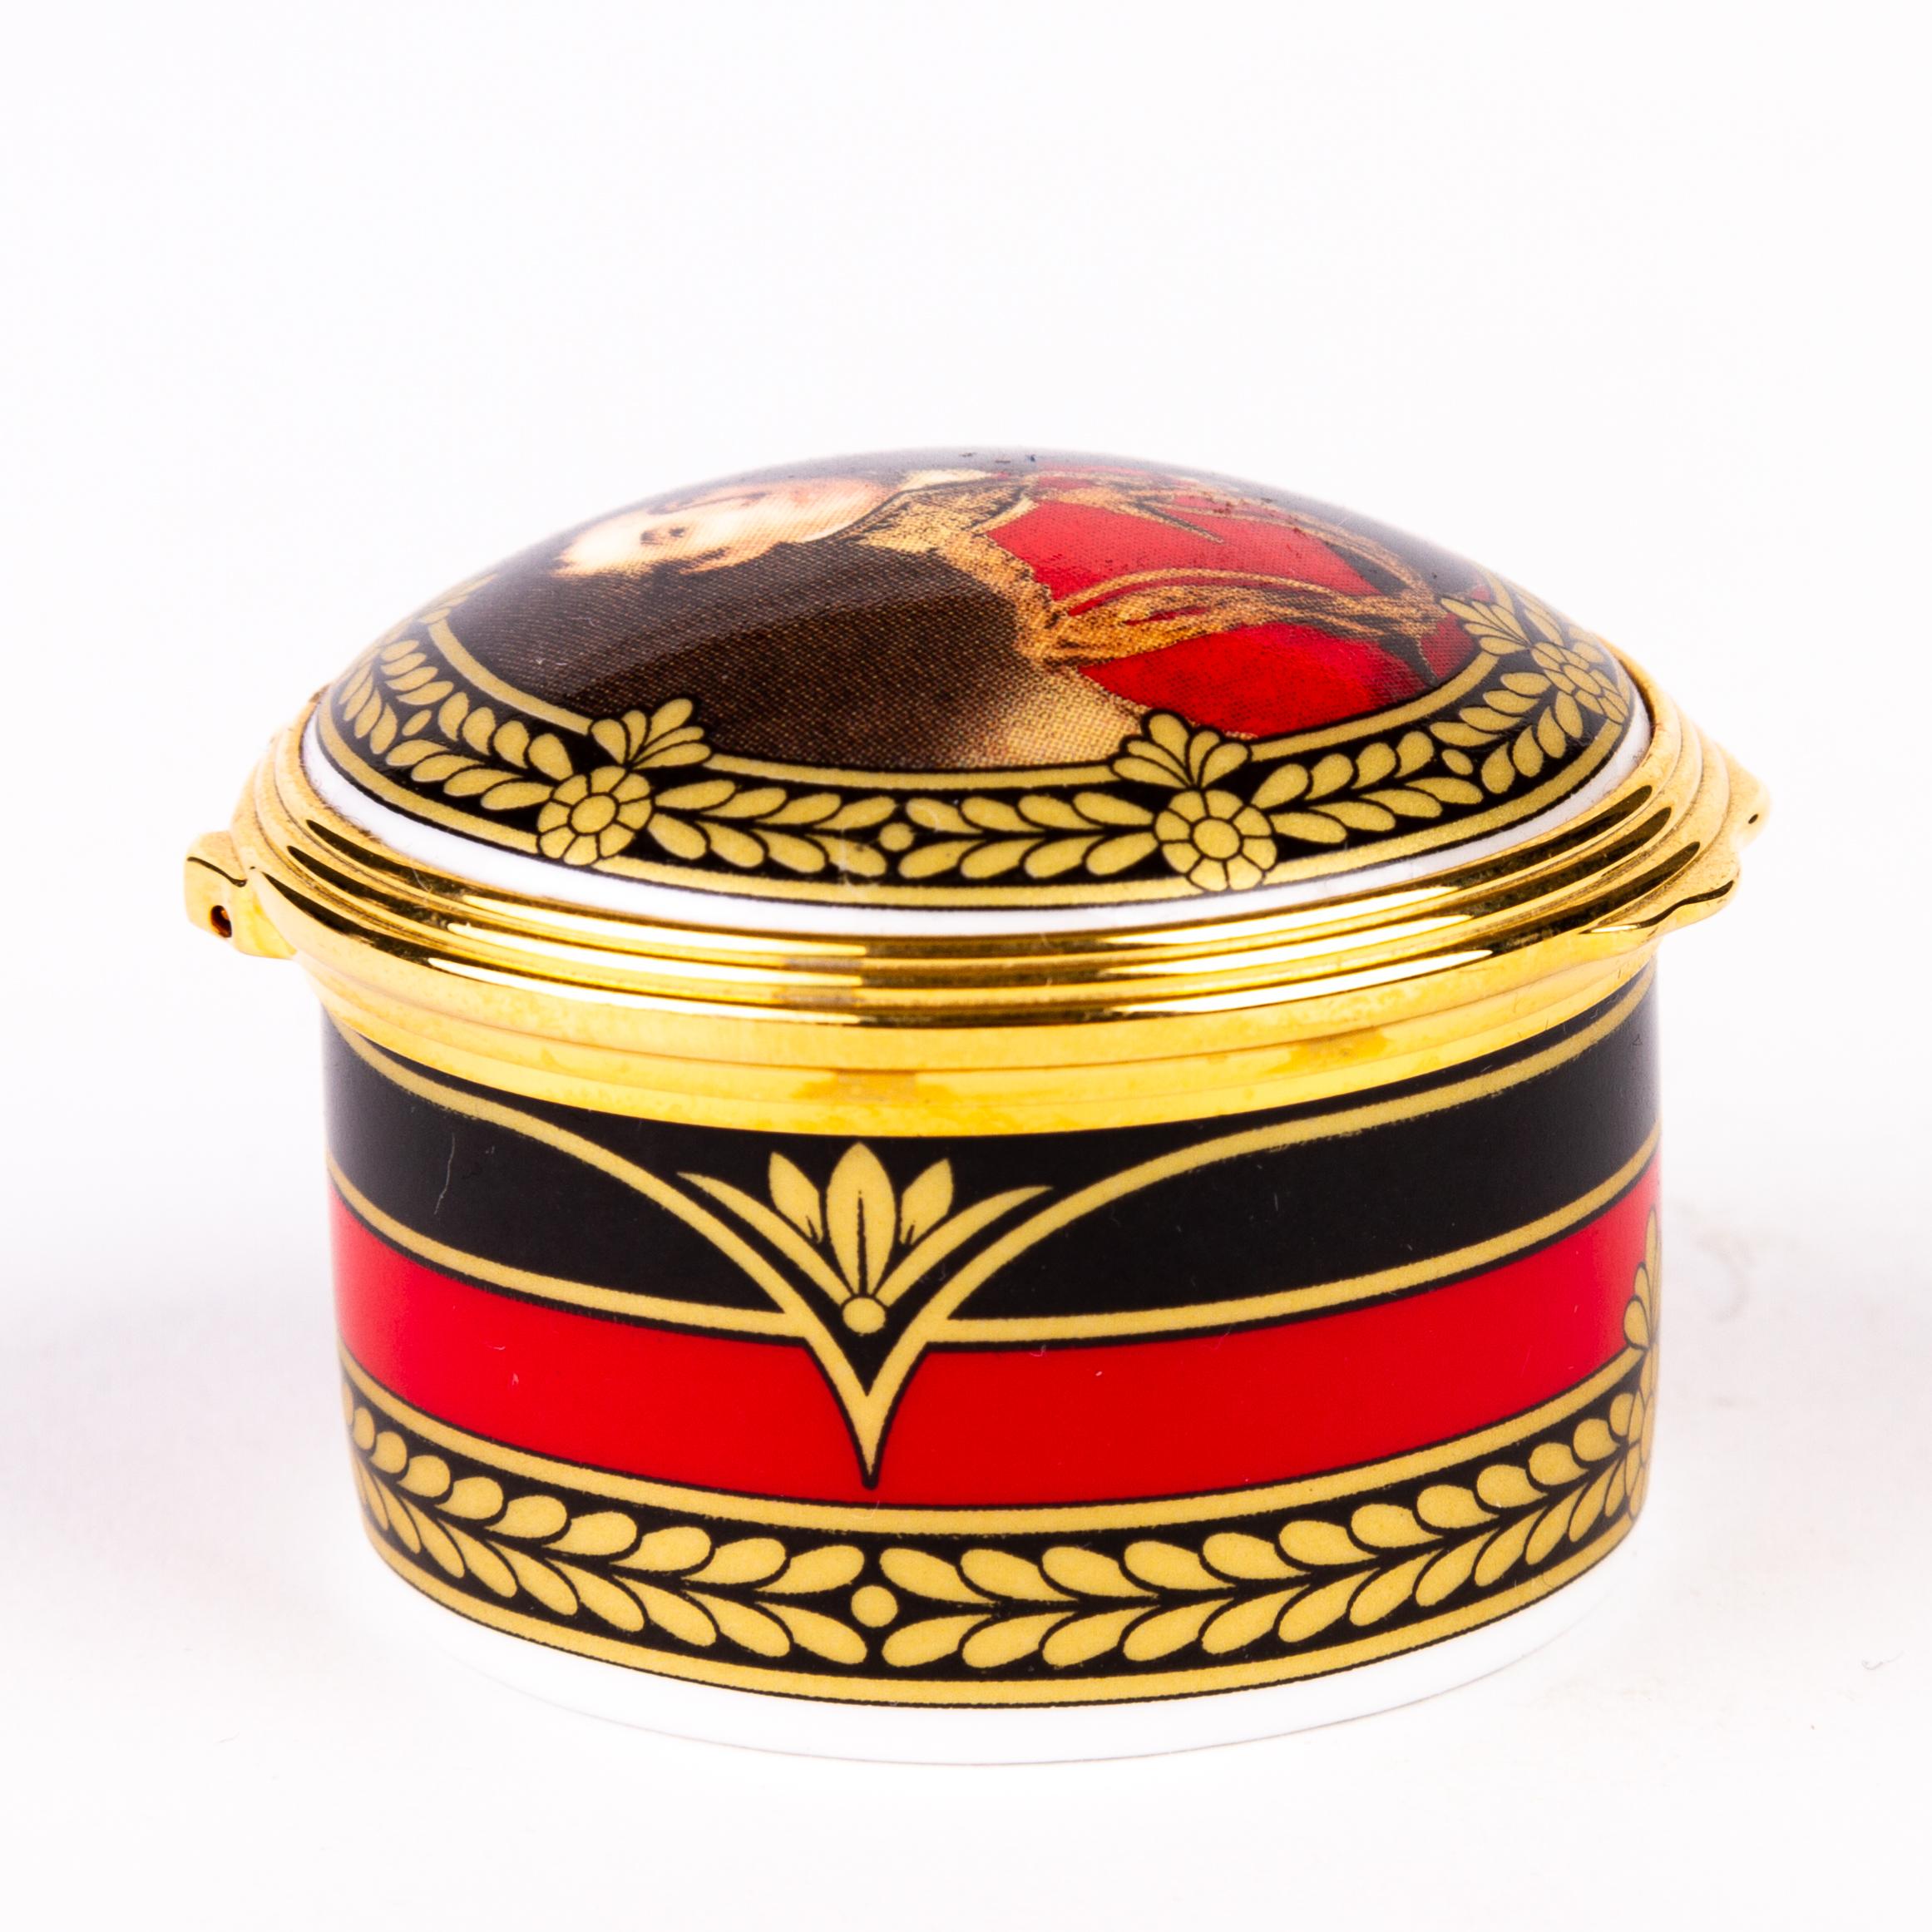 William Edwards Waterloo 24KT Gold Porcelain Pillbox   In Good Condition For Sale In Nottingham, GB